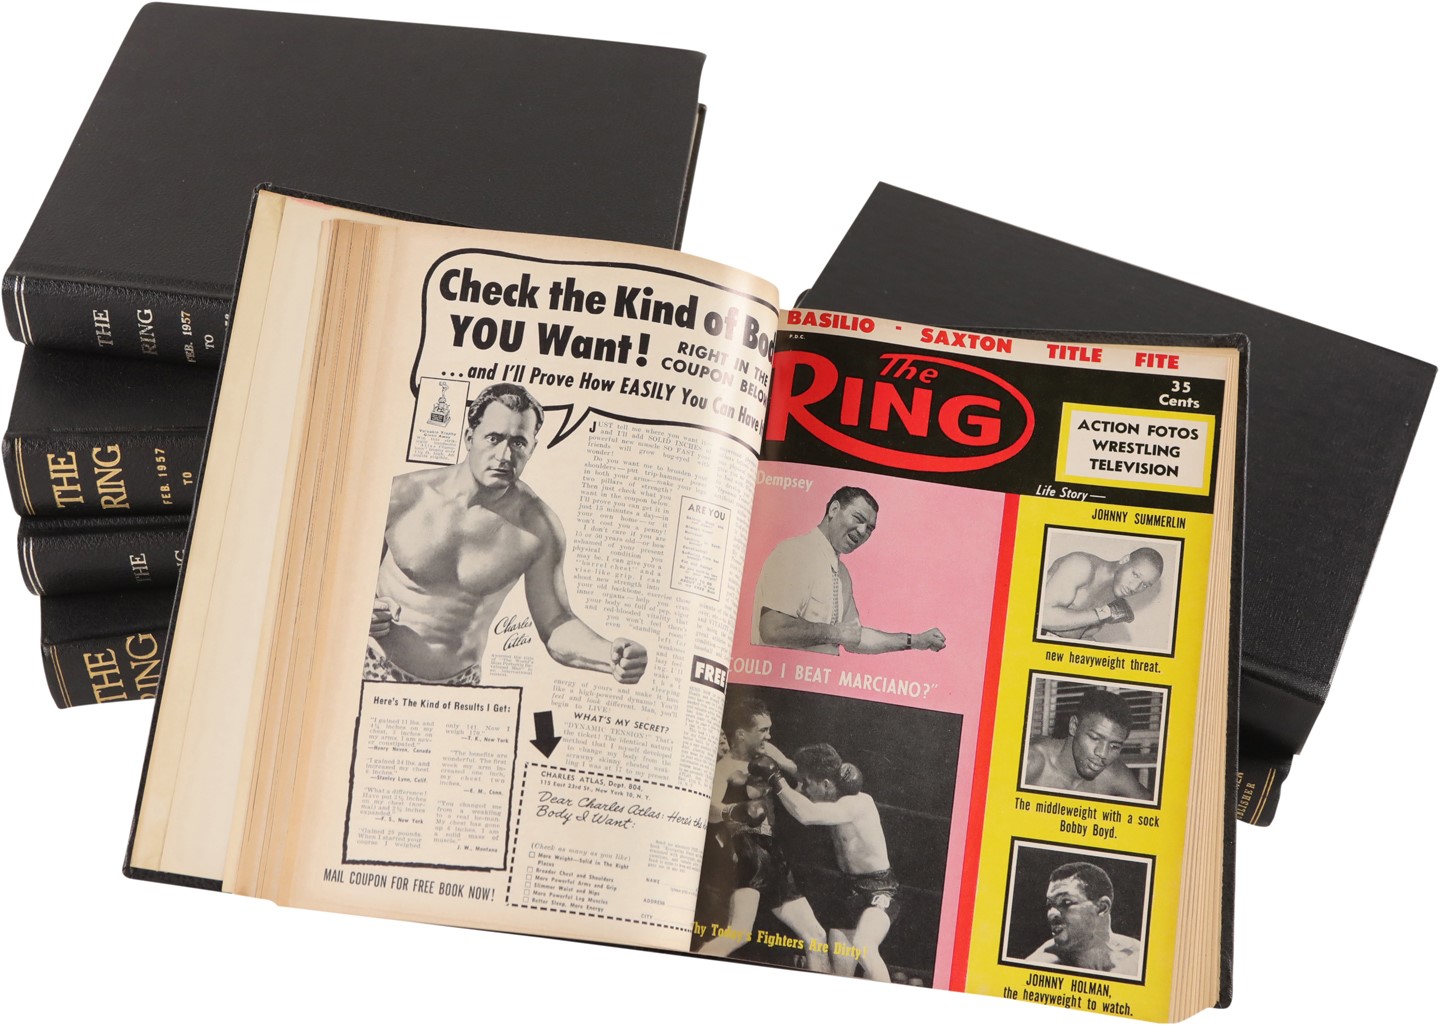 Muhammad Ali & Boxing - Collection of The Ring Boxing Magazine Bounds Volumes from the 1950s Including (2) Autographs Part 2 (7)